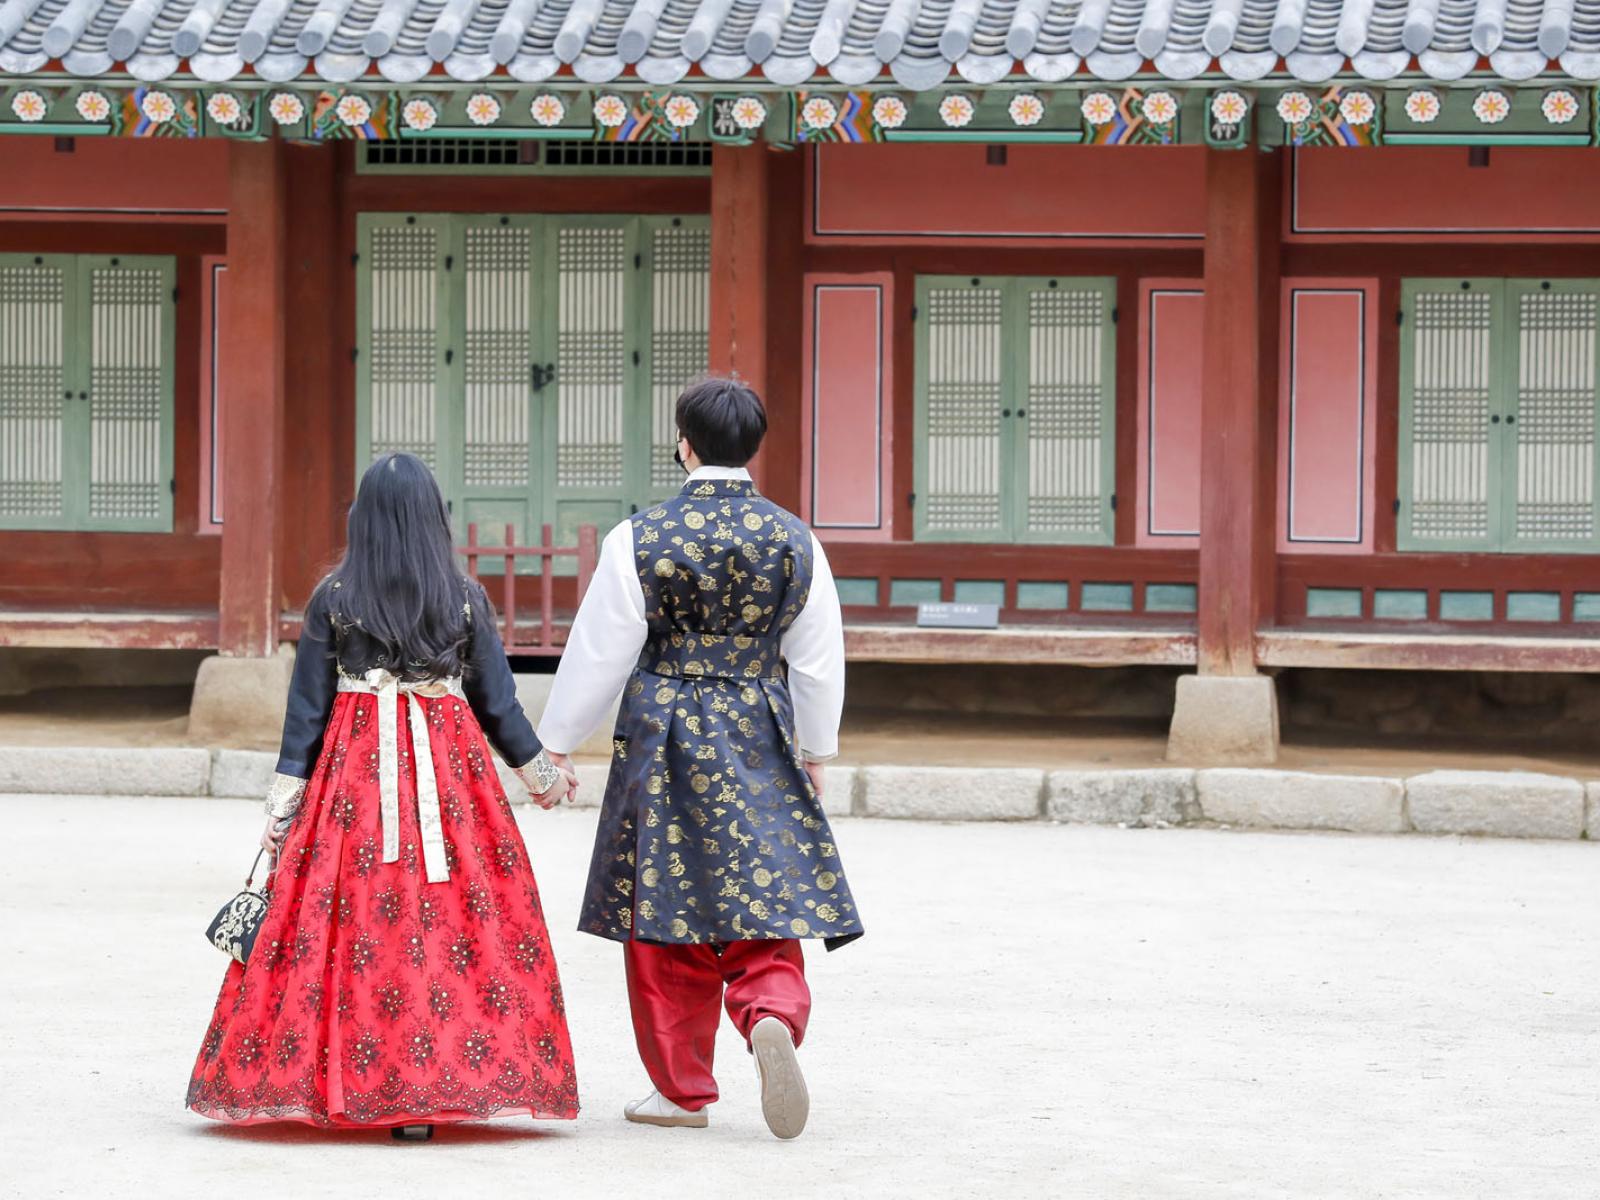 Two Koreans are walking in the Royal Palace in traditional attire